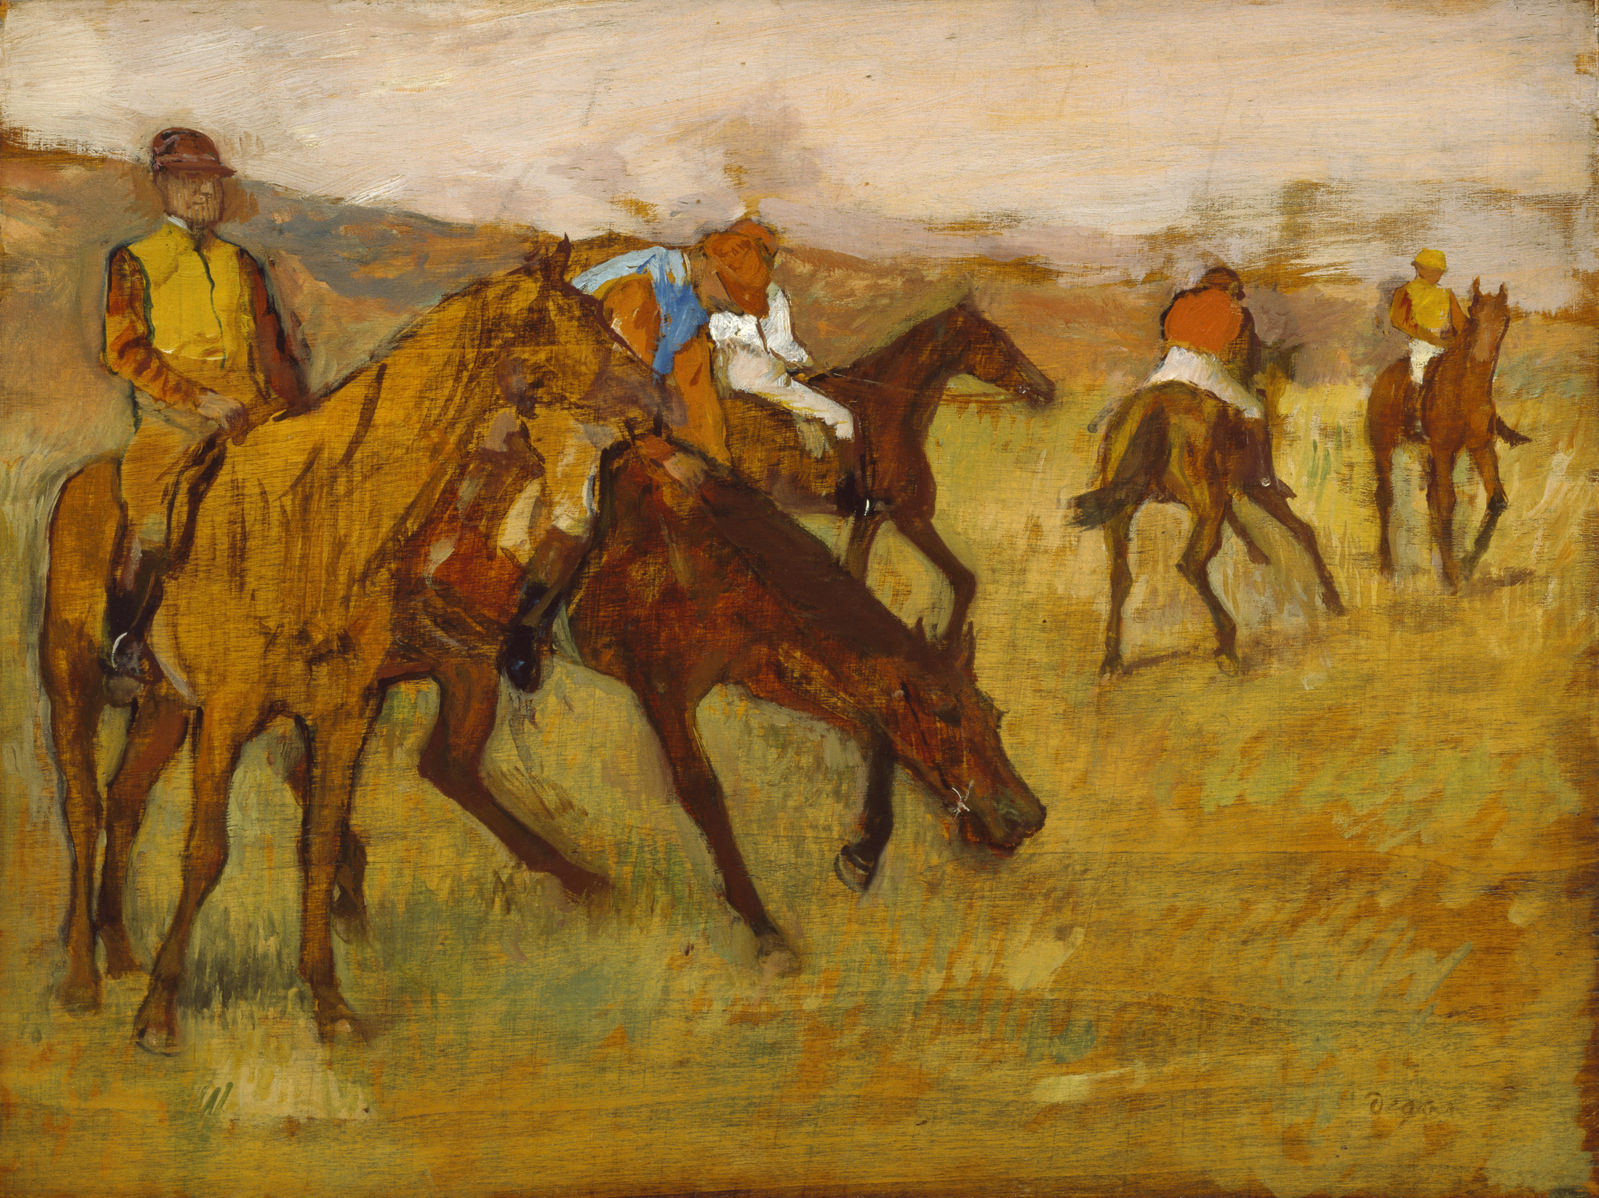 Five horses with jockeys waiting in a field